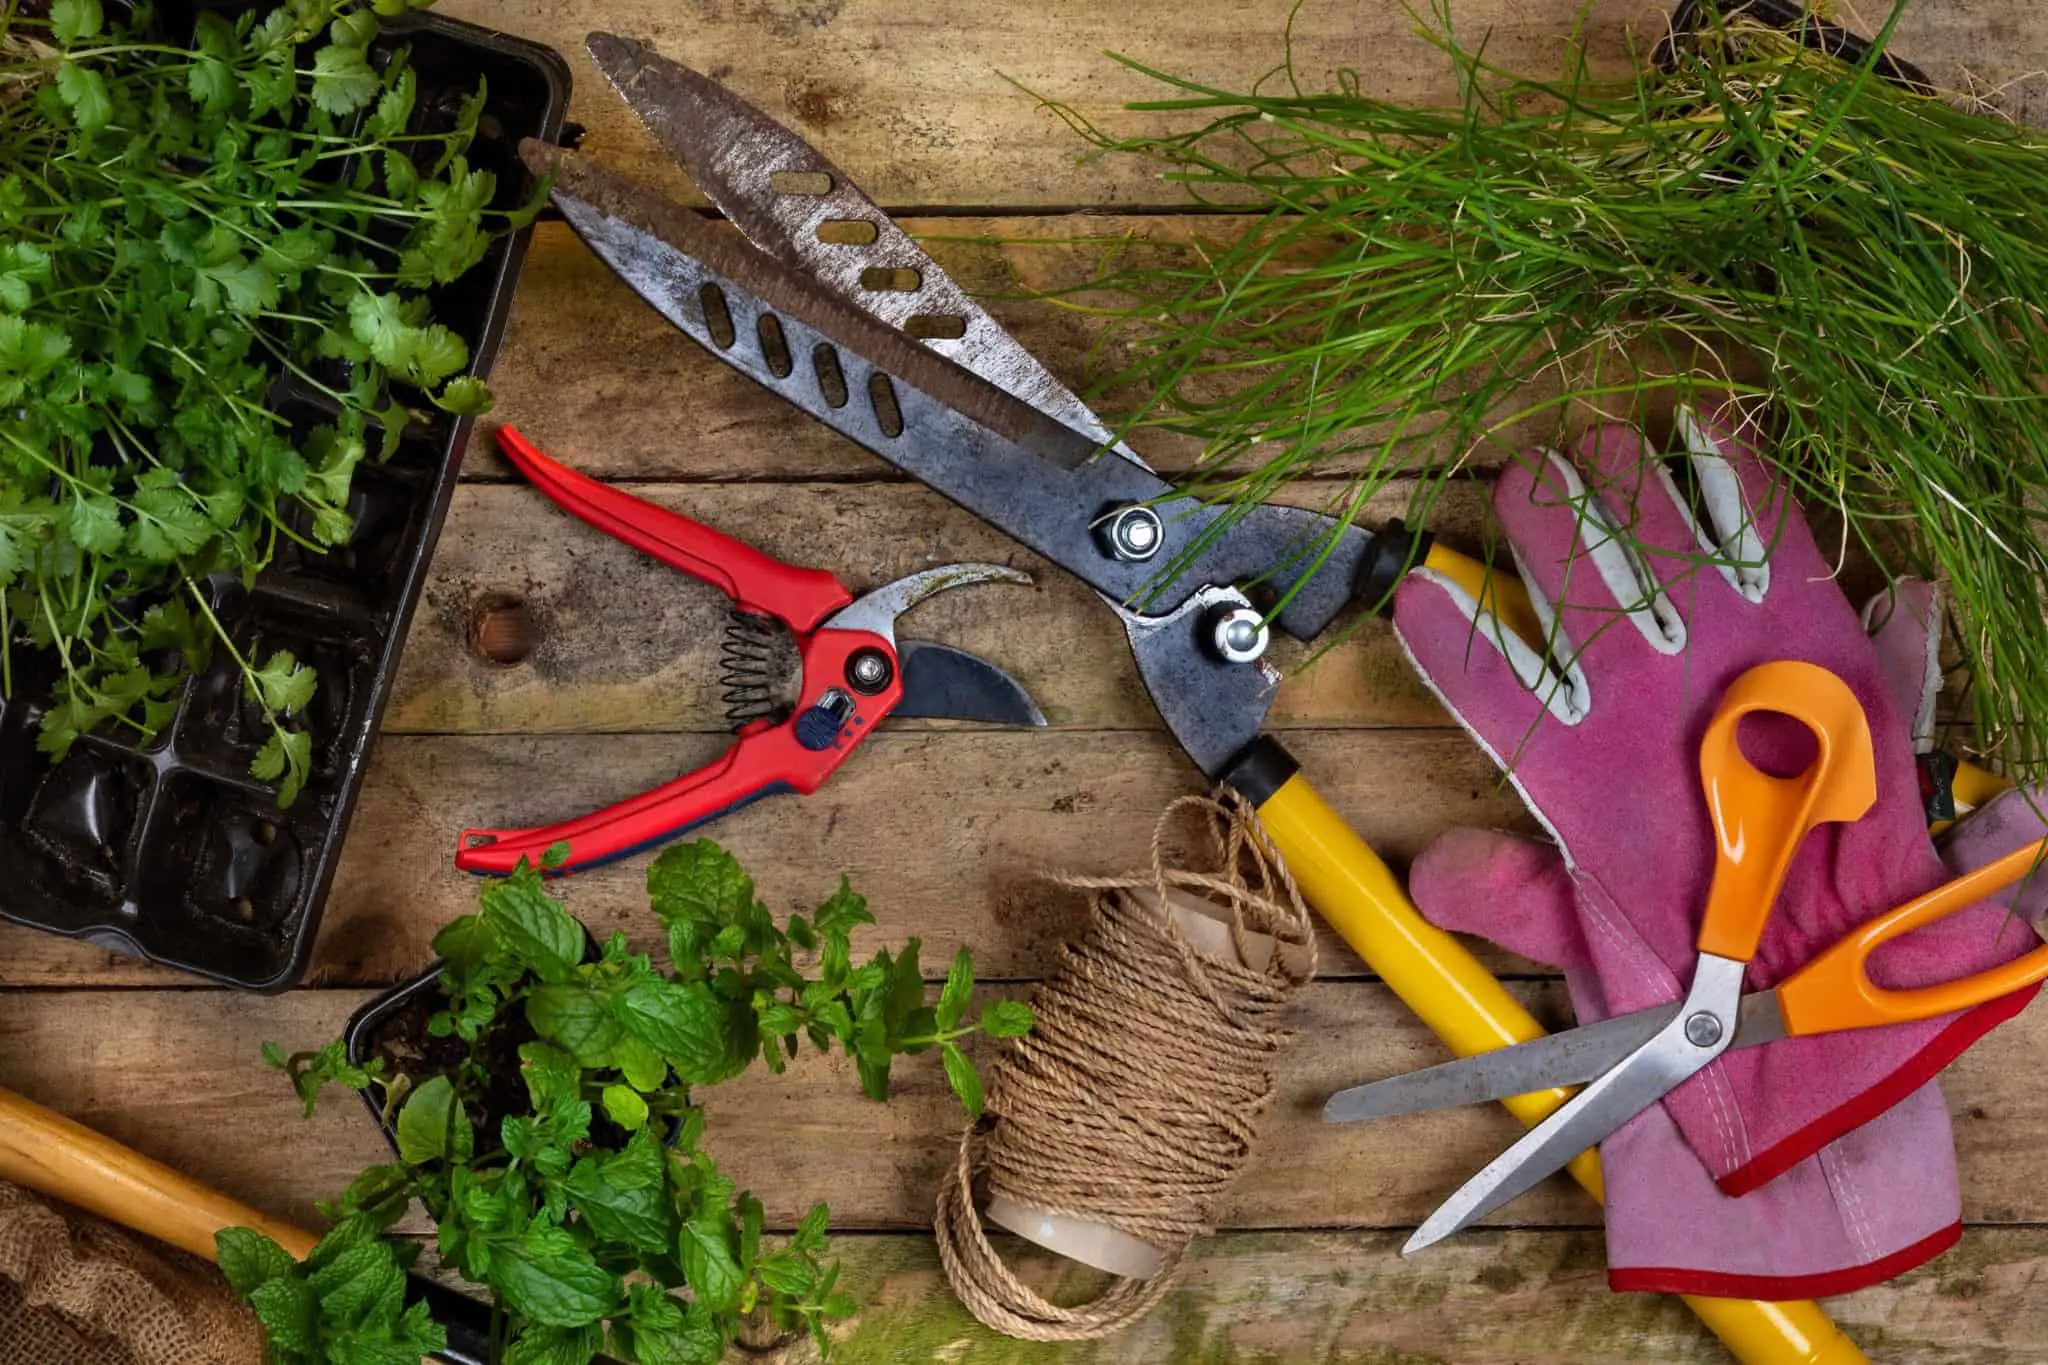 How to Choose the Right Gardening Tools for Your Needs